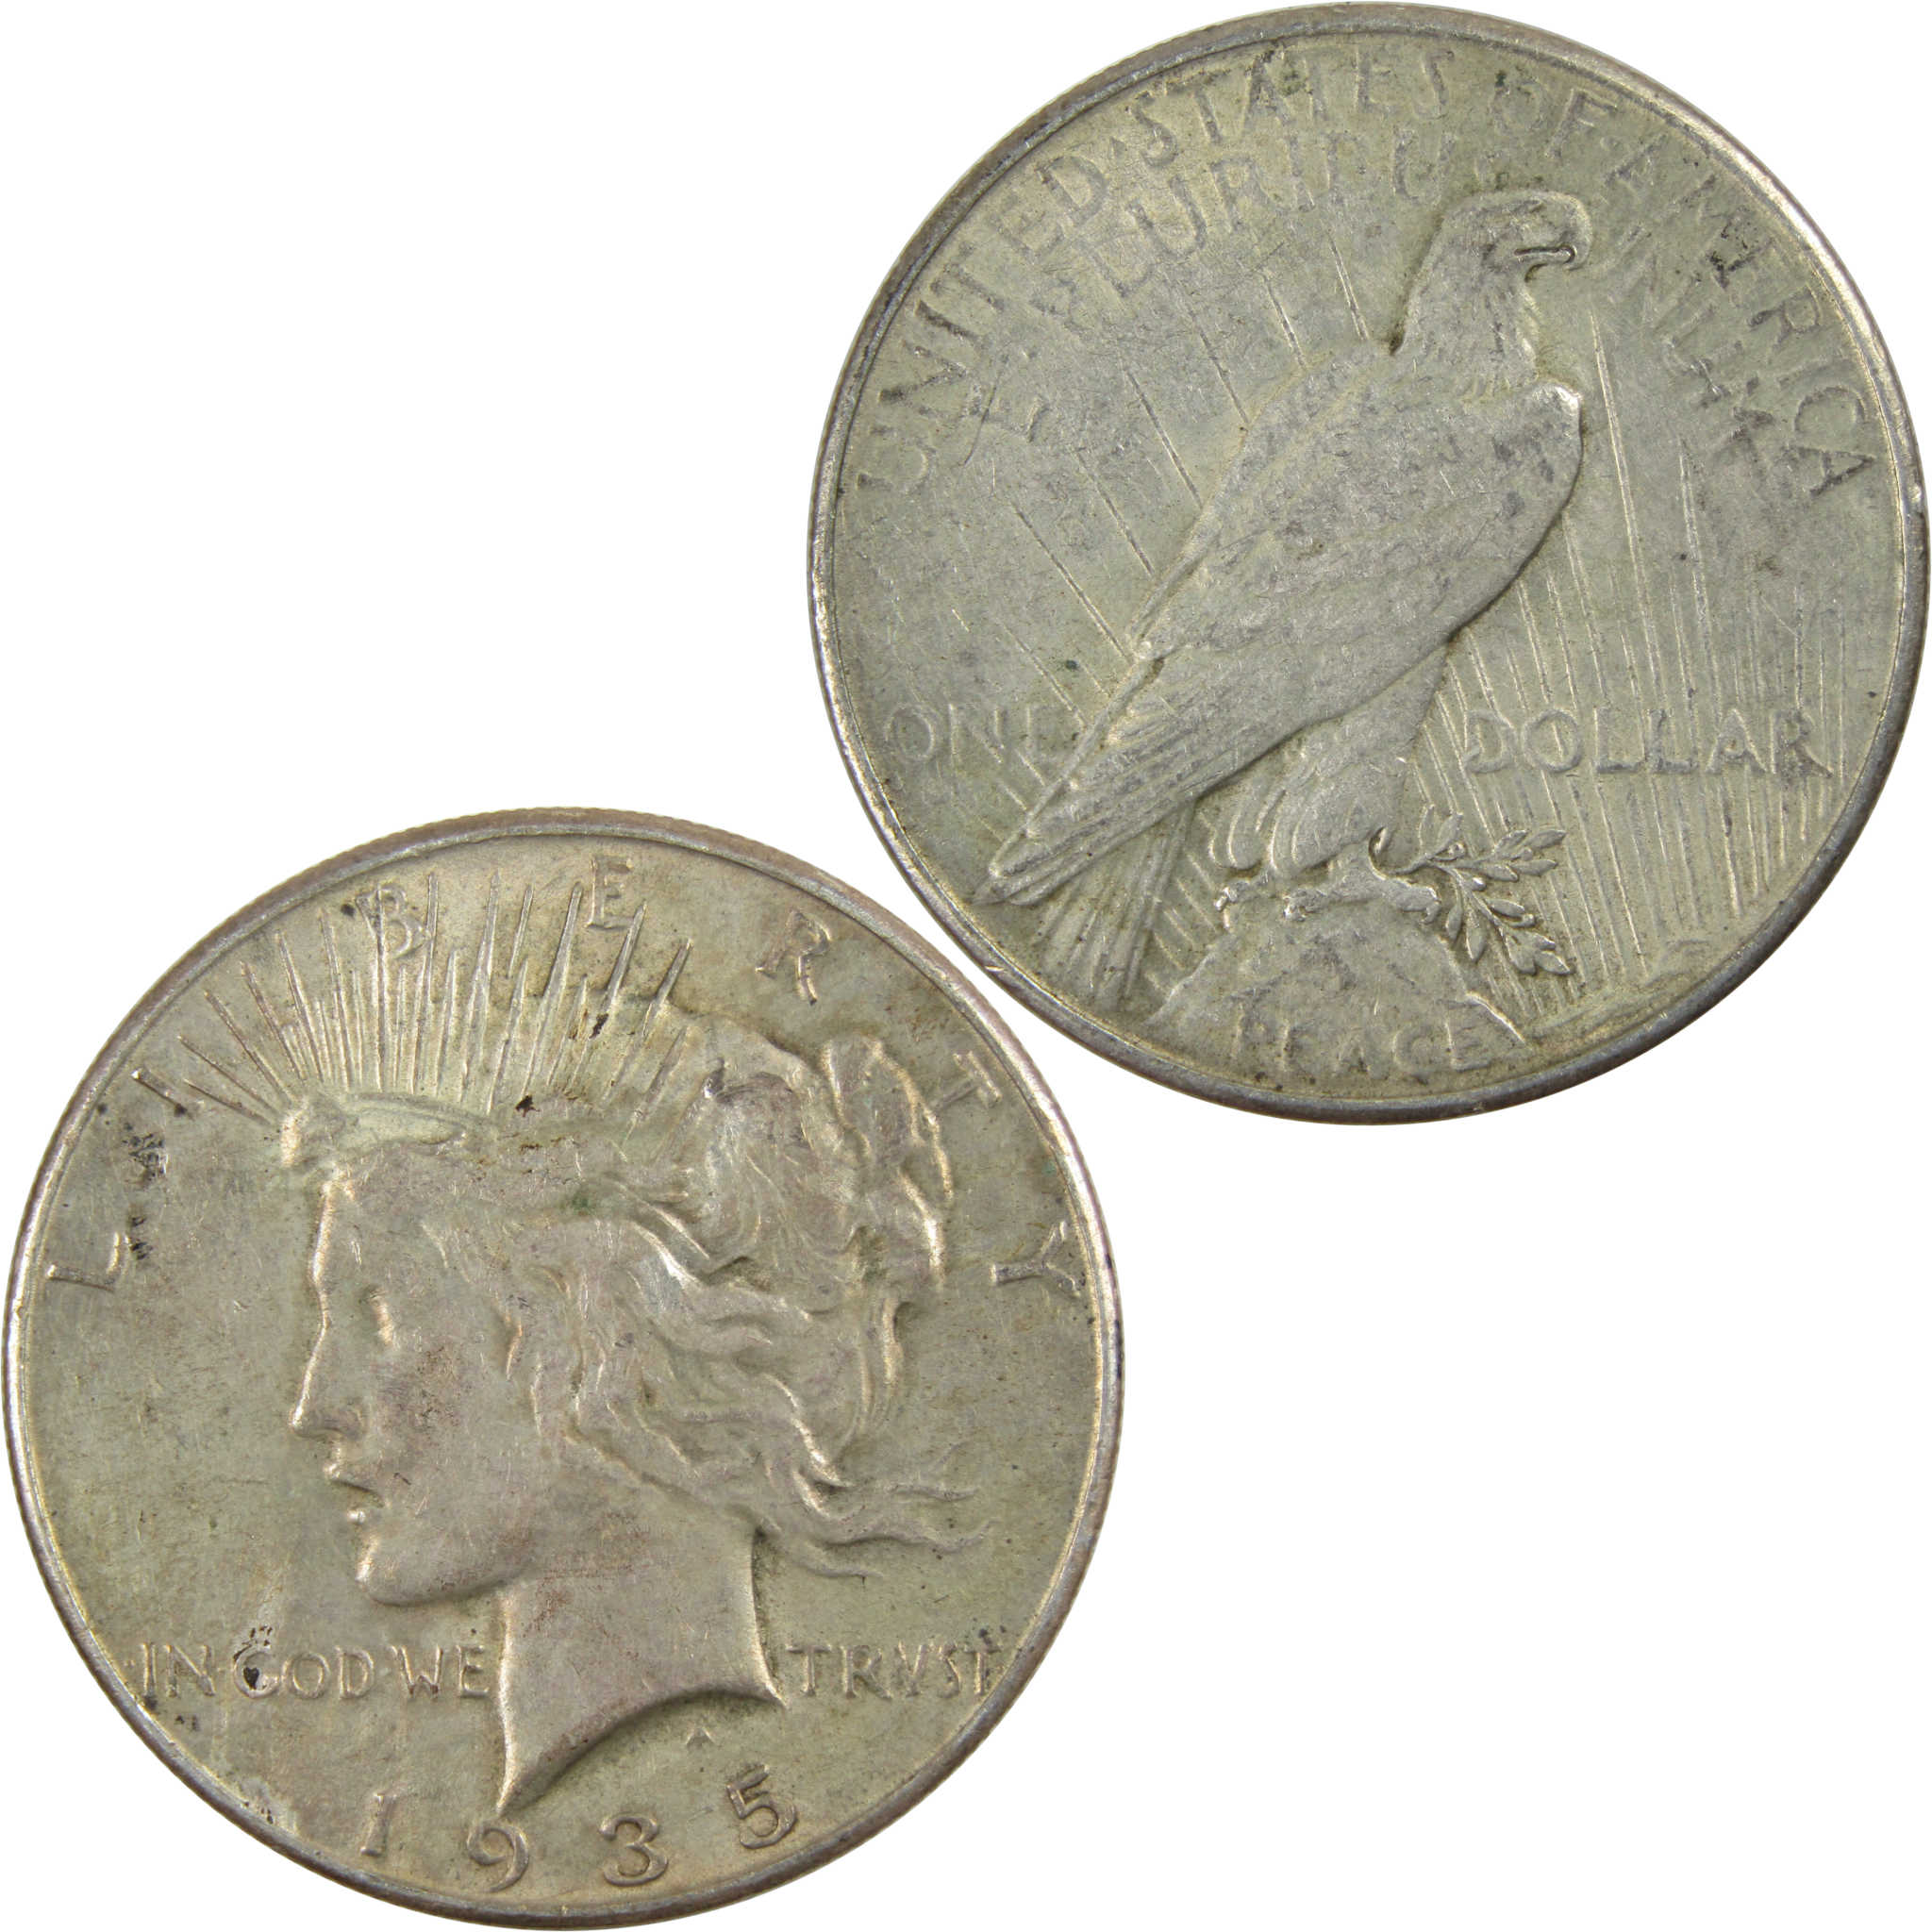 1935 Peace Dollar XF EF Extremely Fine 90% Silver $1 Coin SKU:I7184